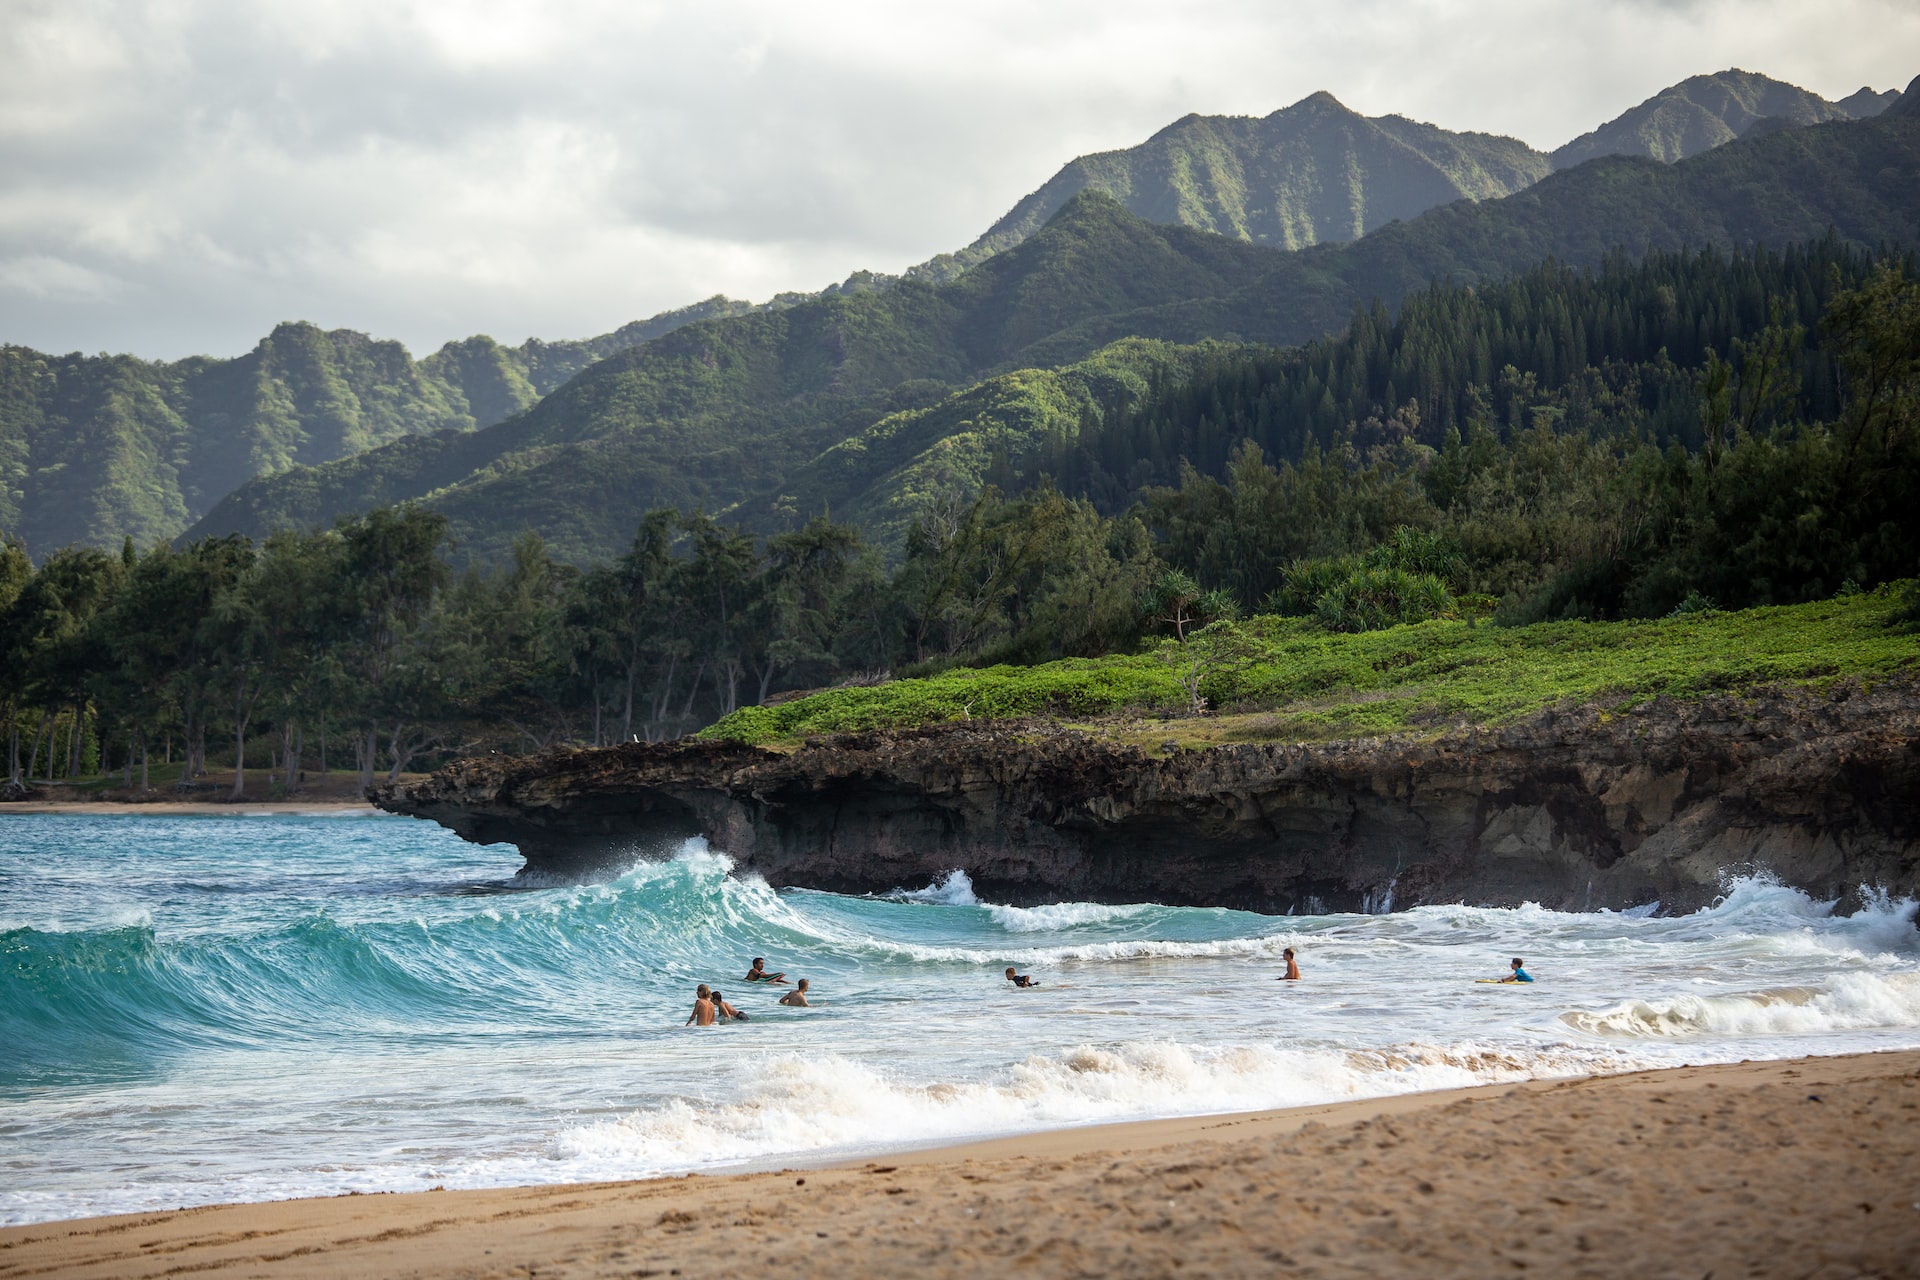 Surfers enjoying the majestic views and crystal-clear water in Hawaii.